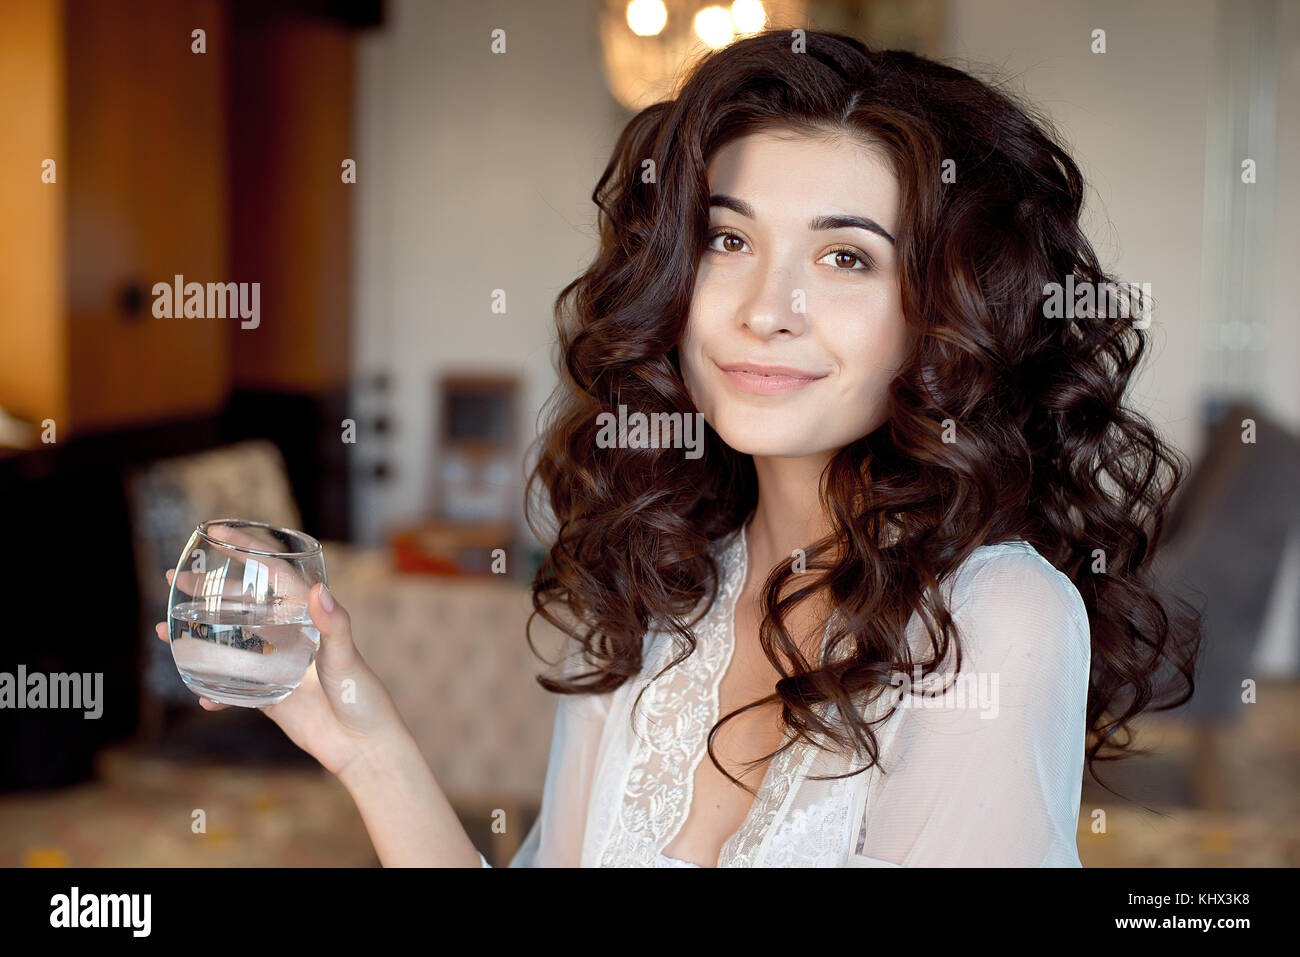 Attractive coy woman with downcast eyes wearing eye shadow holding a glass of cold beverage in her hand as she sits smiling on a sofa at home with a s Stock Photo